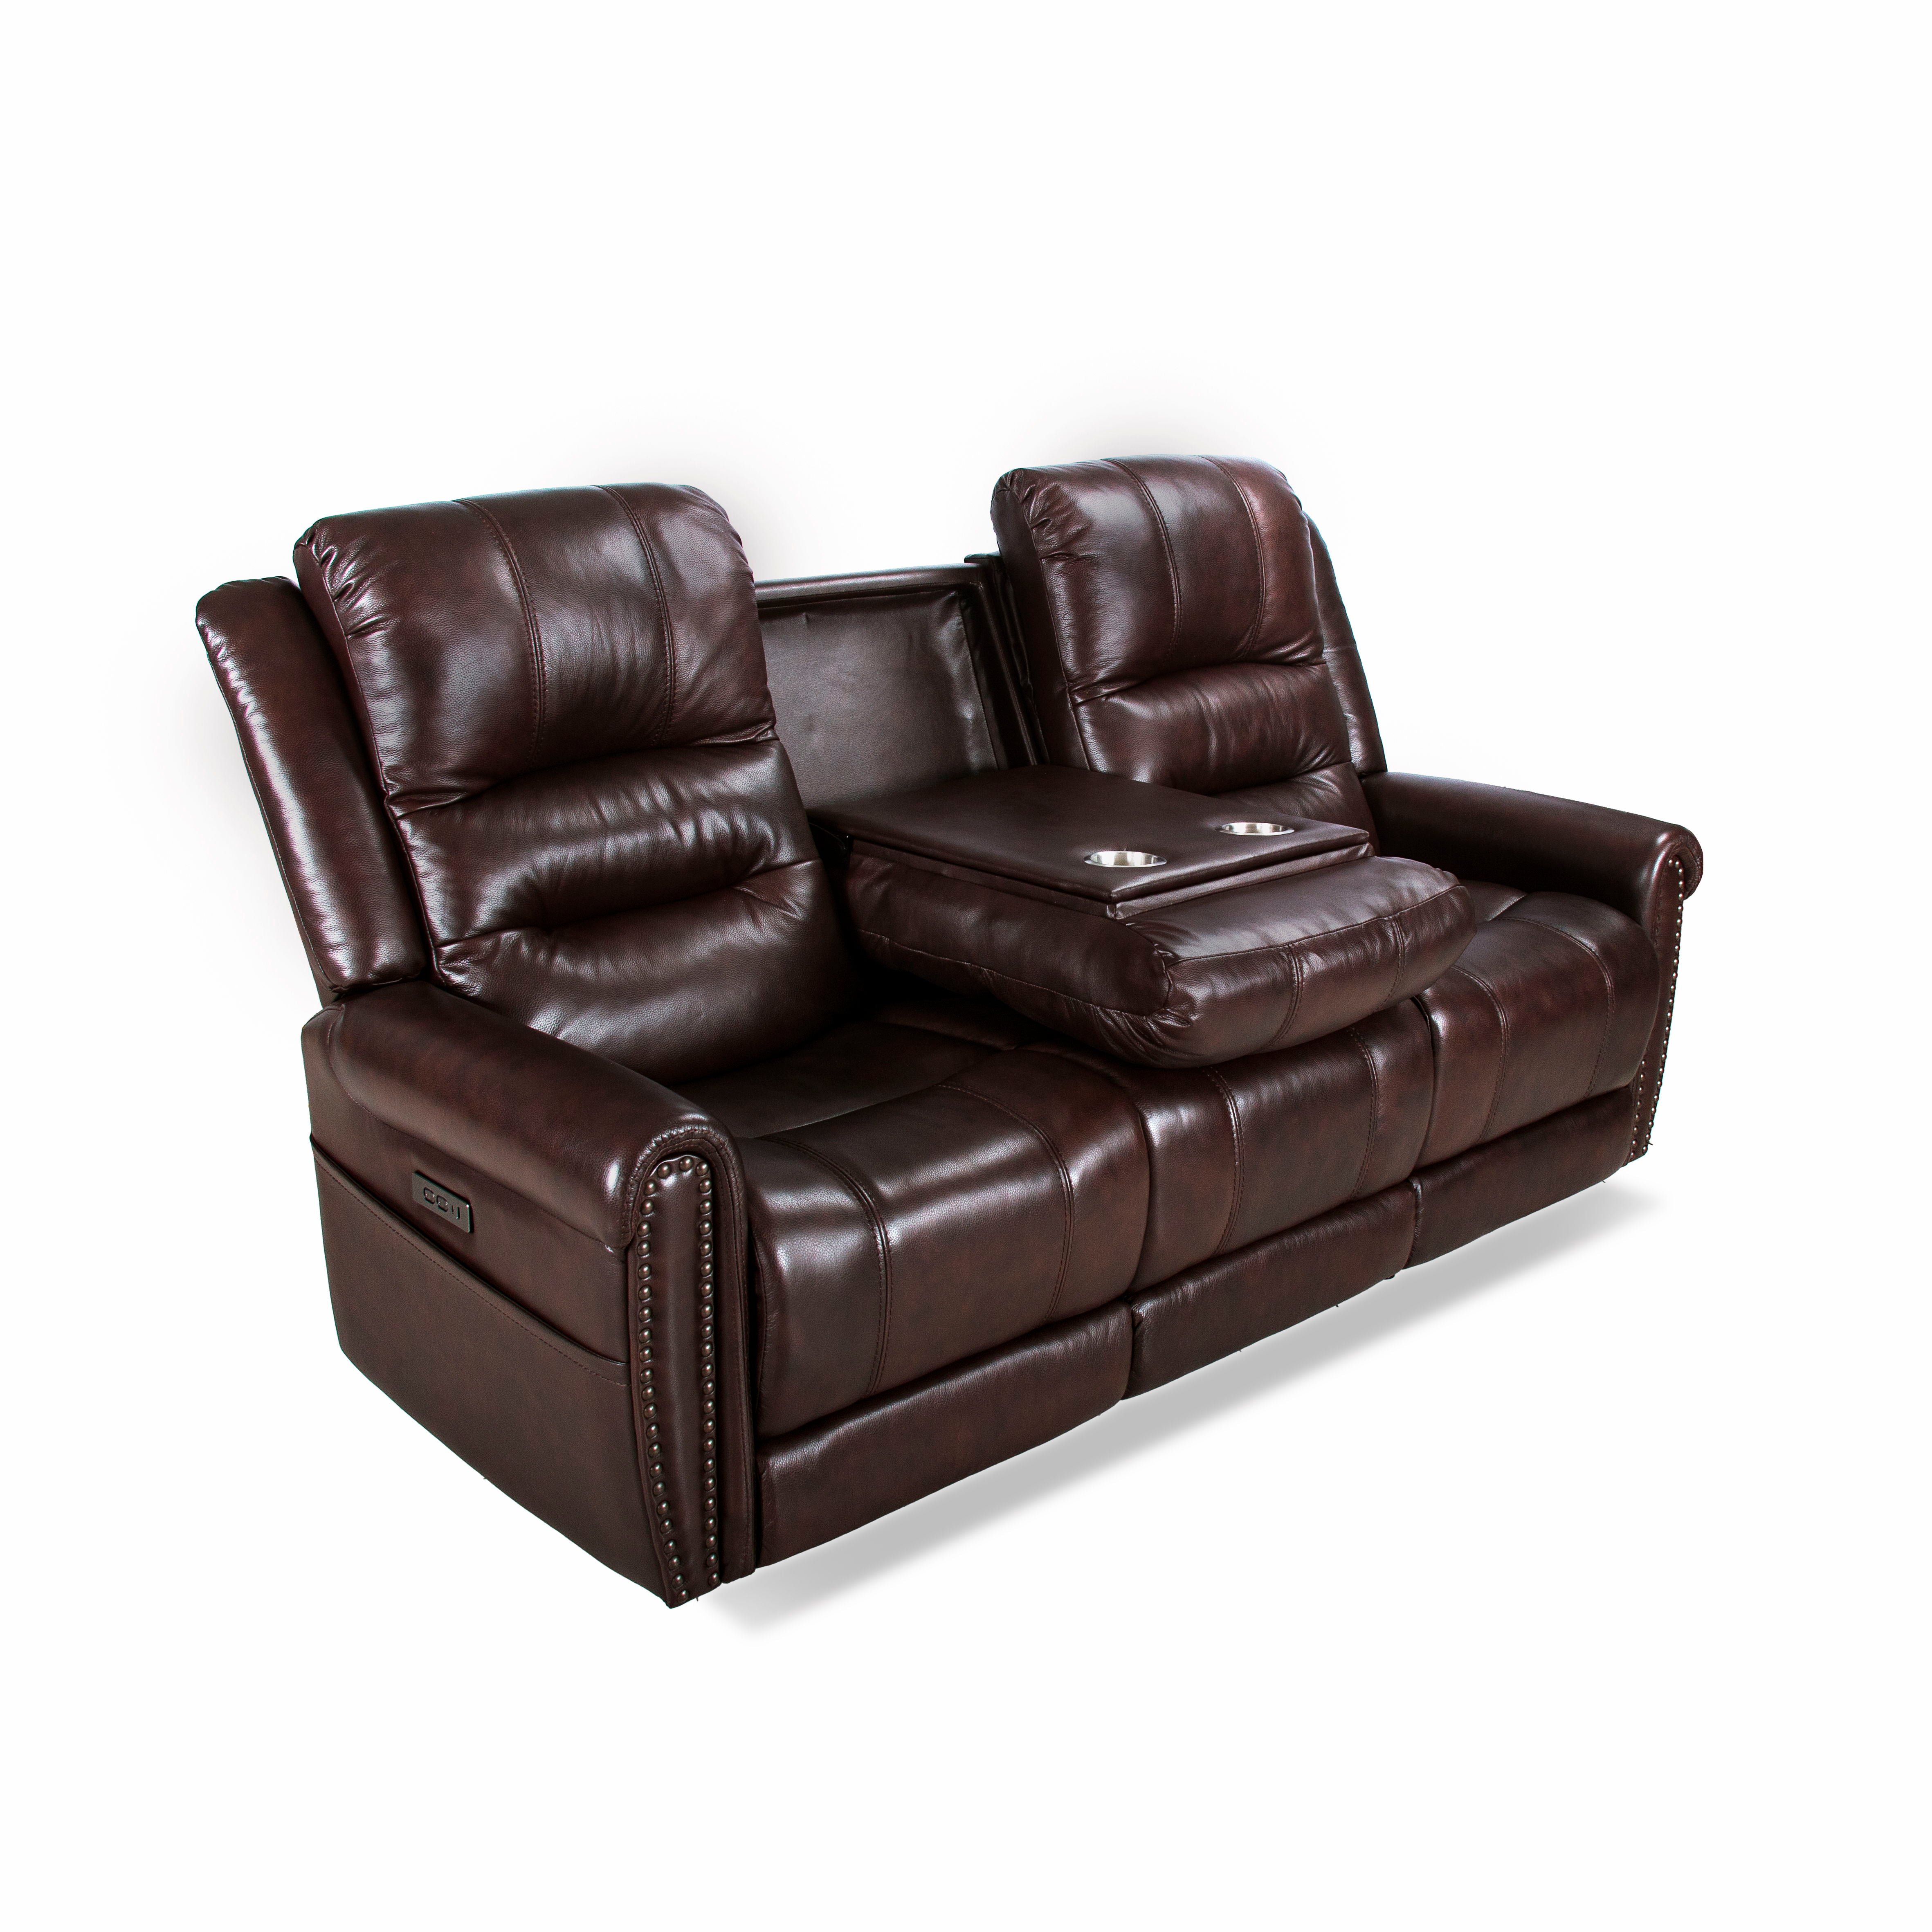 Espoo - Genuine Top Grain Leather Nailhead Dropdown Table And Adjustable Headrest Power Reclining Sofa In Brown